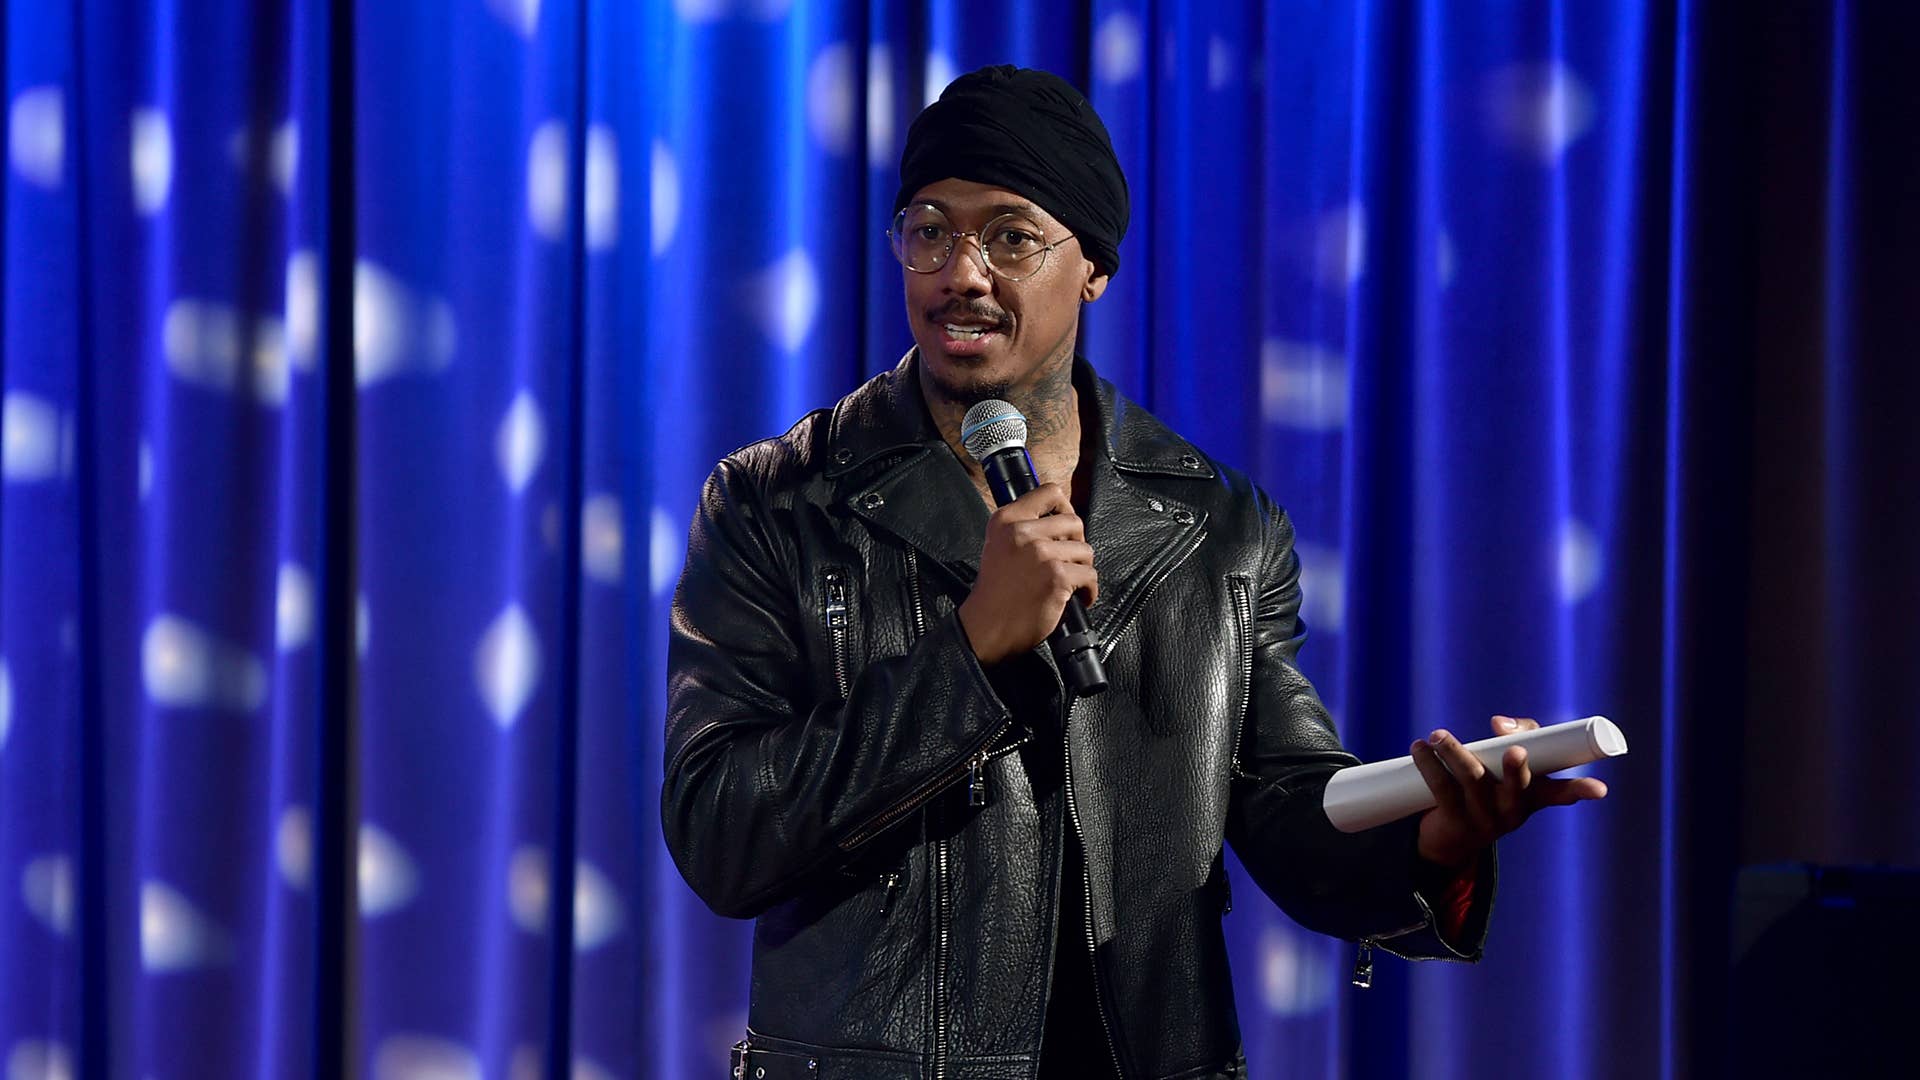 Nick Cannon attends The Recording Academy's Black Music Collective mental health event.